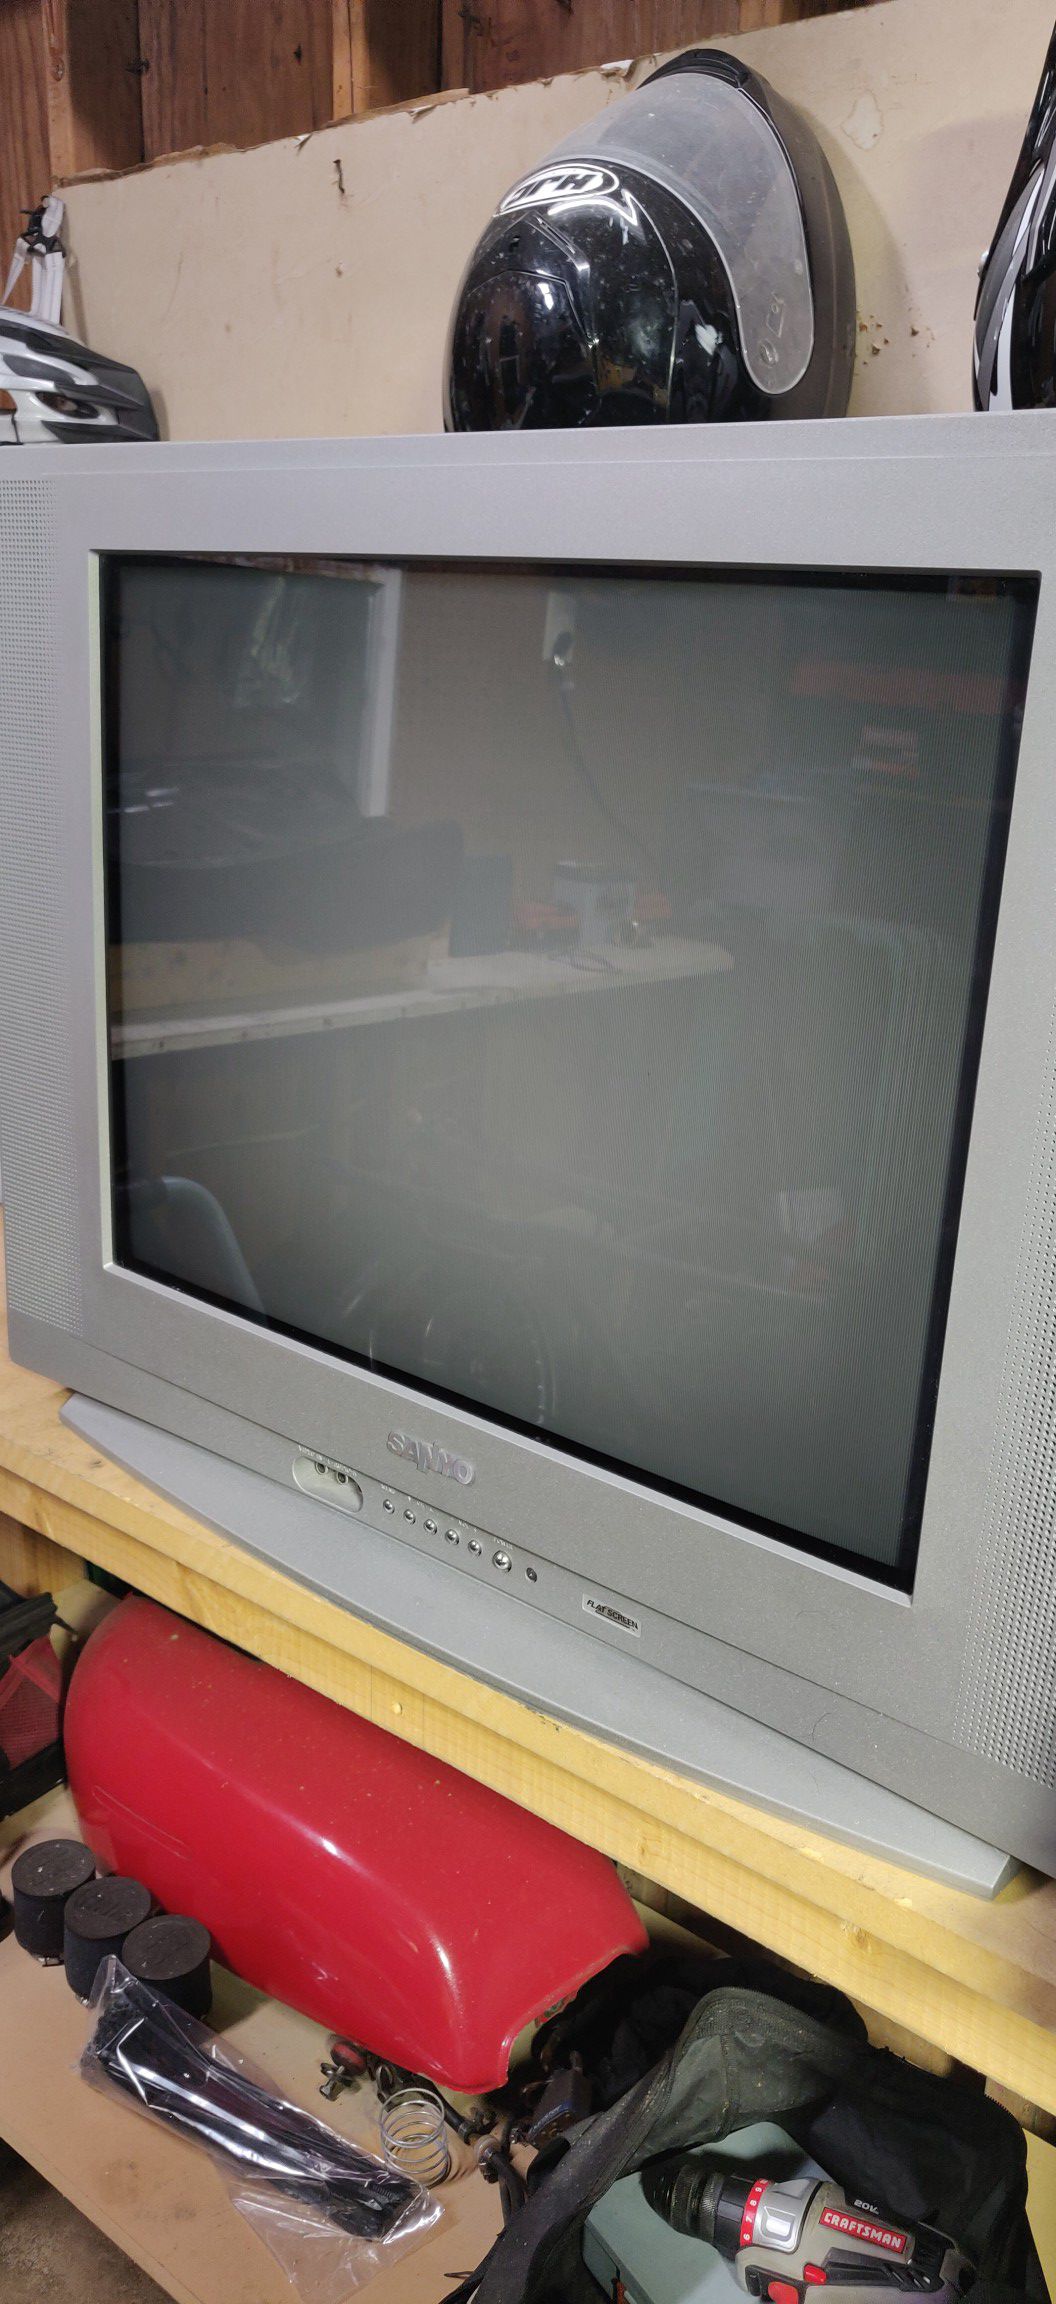 Sanyo 24" TV with remote